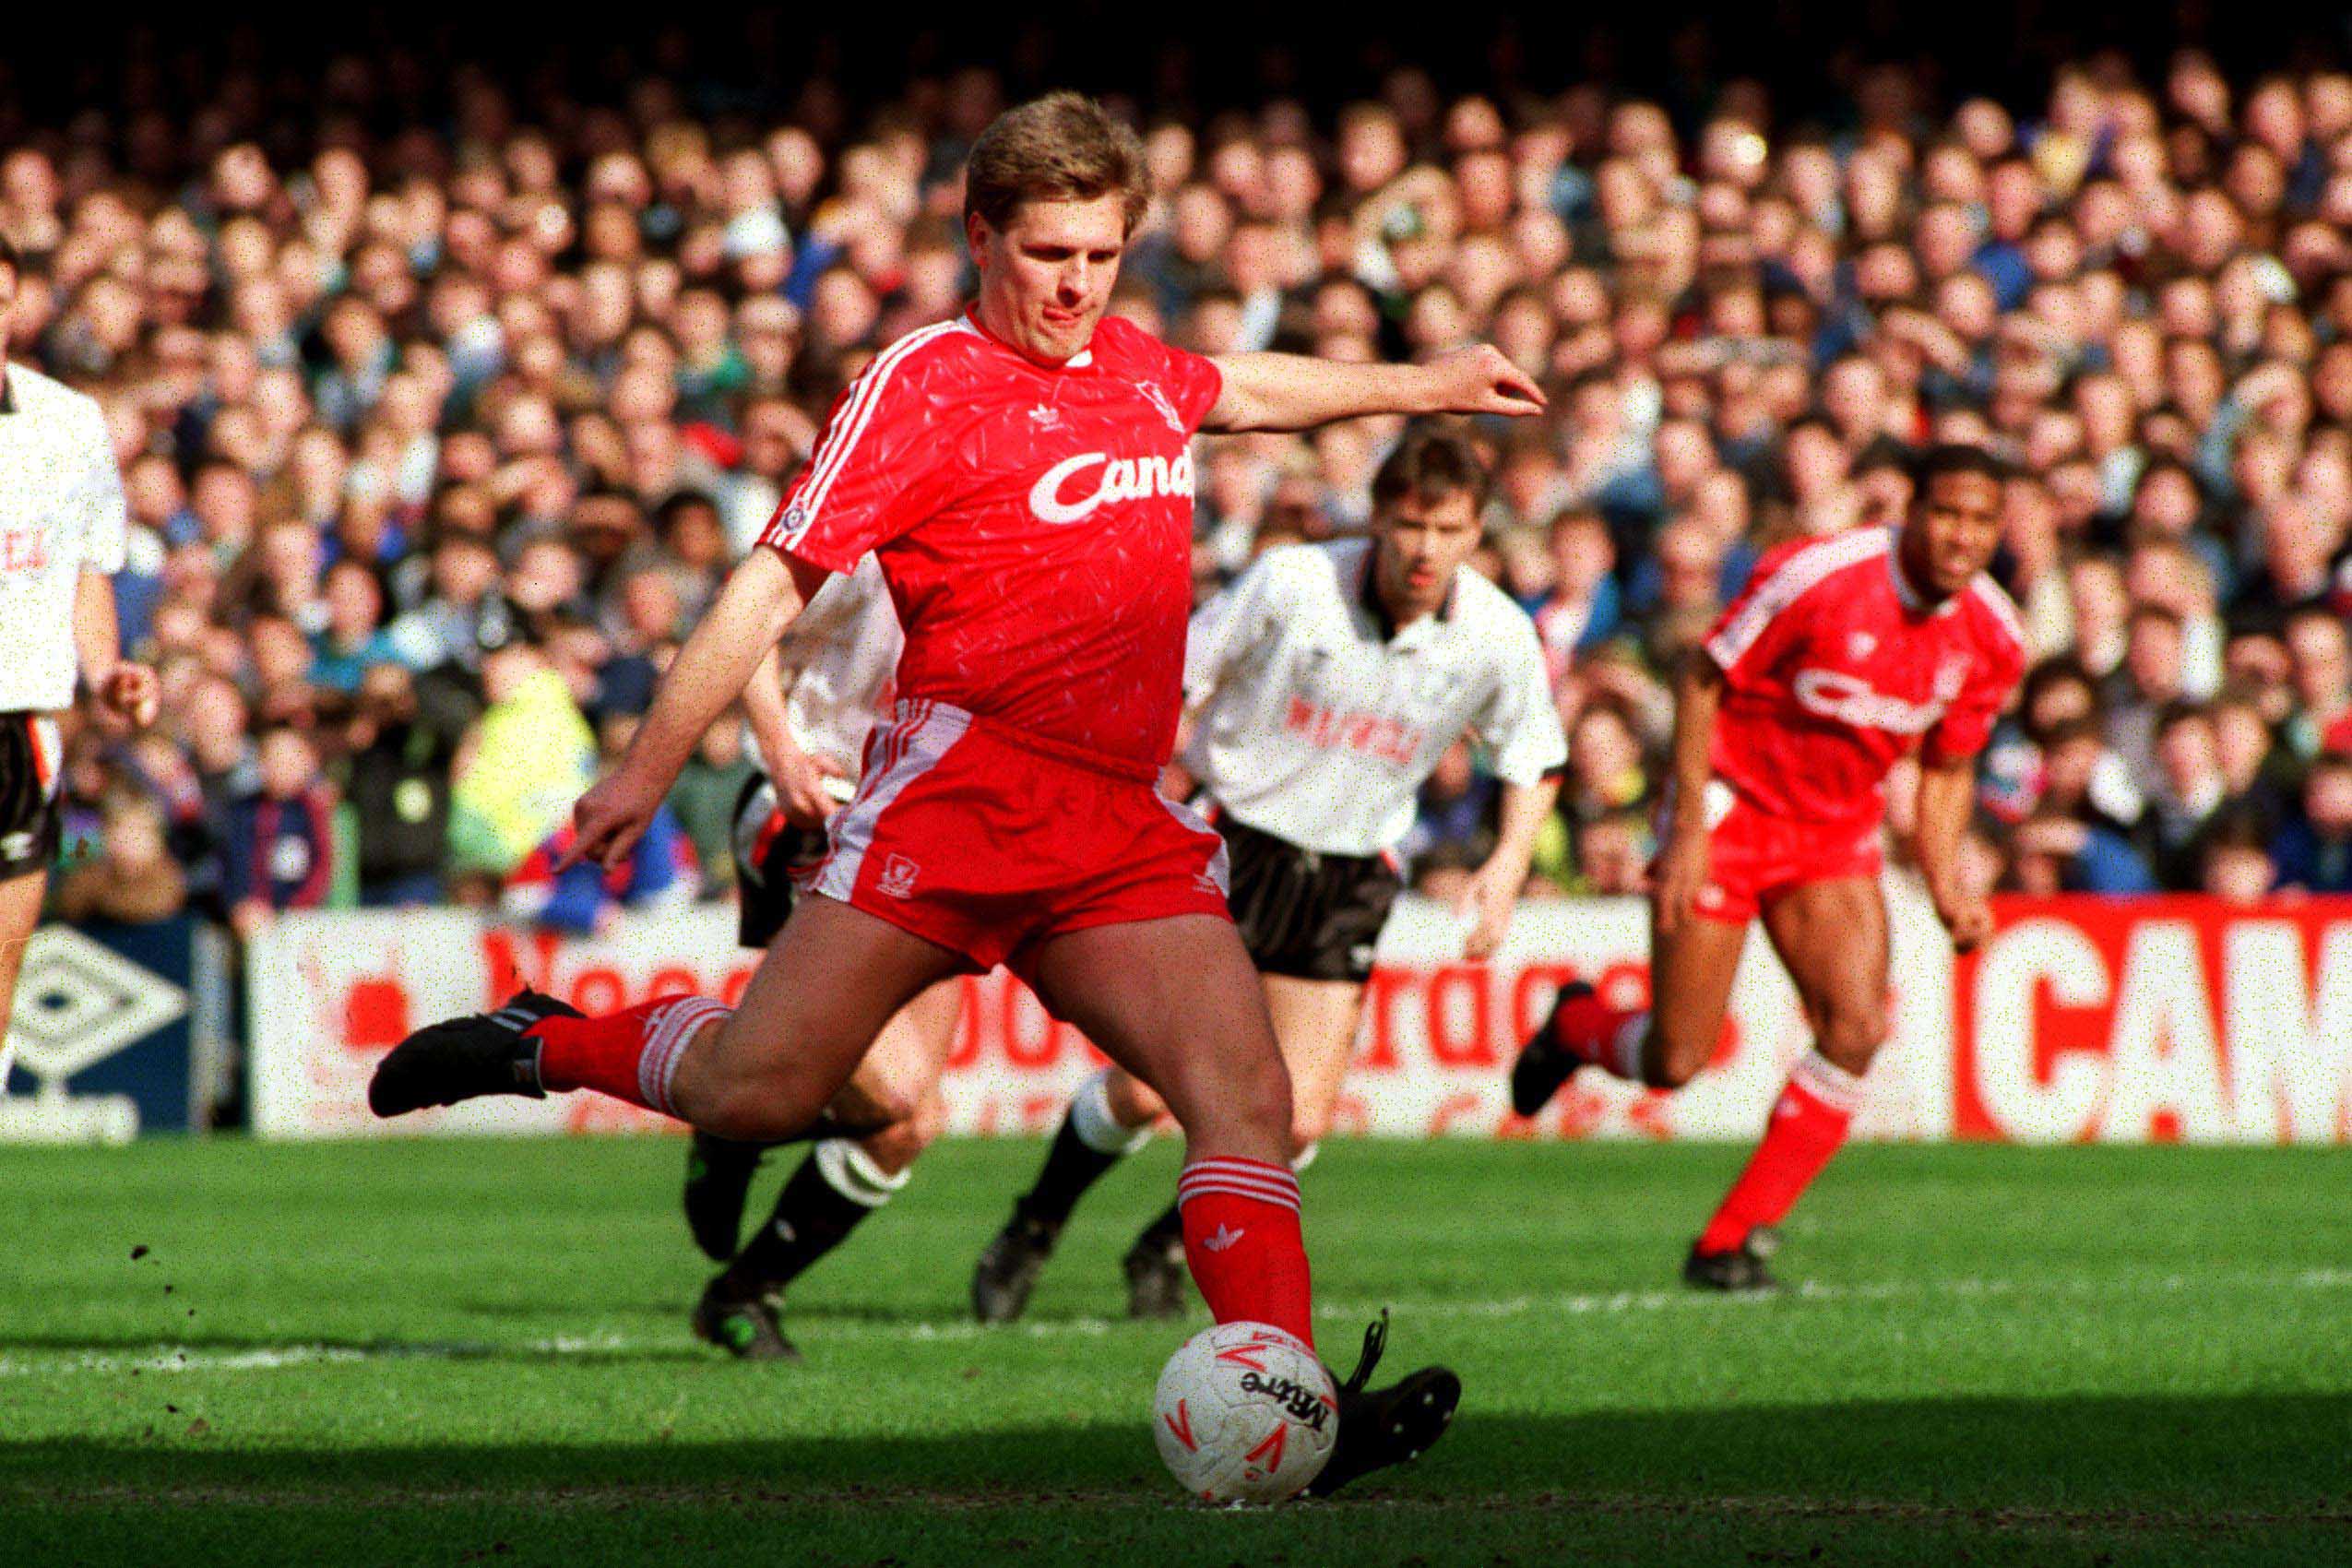 REVIEW: MEN IN WHITE SUITS – LIVERPOOL FC IN THE 1990s